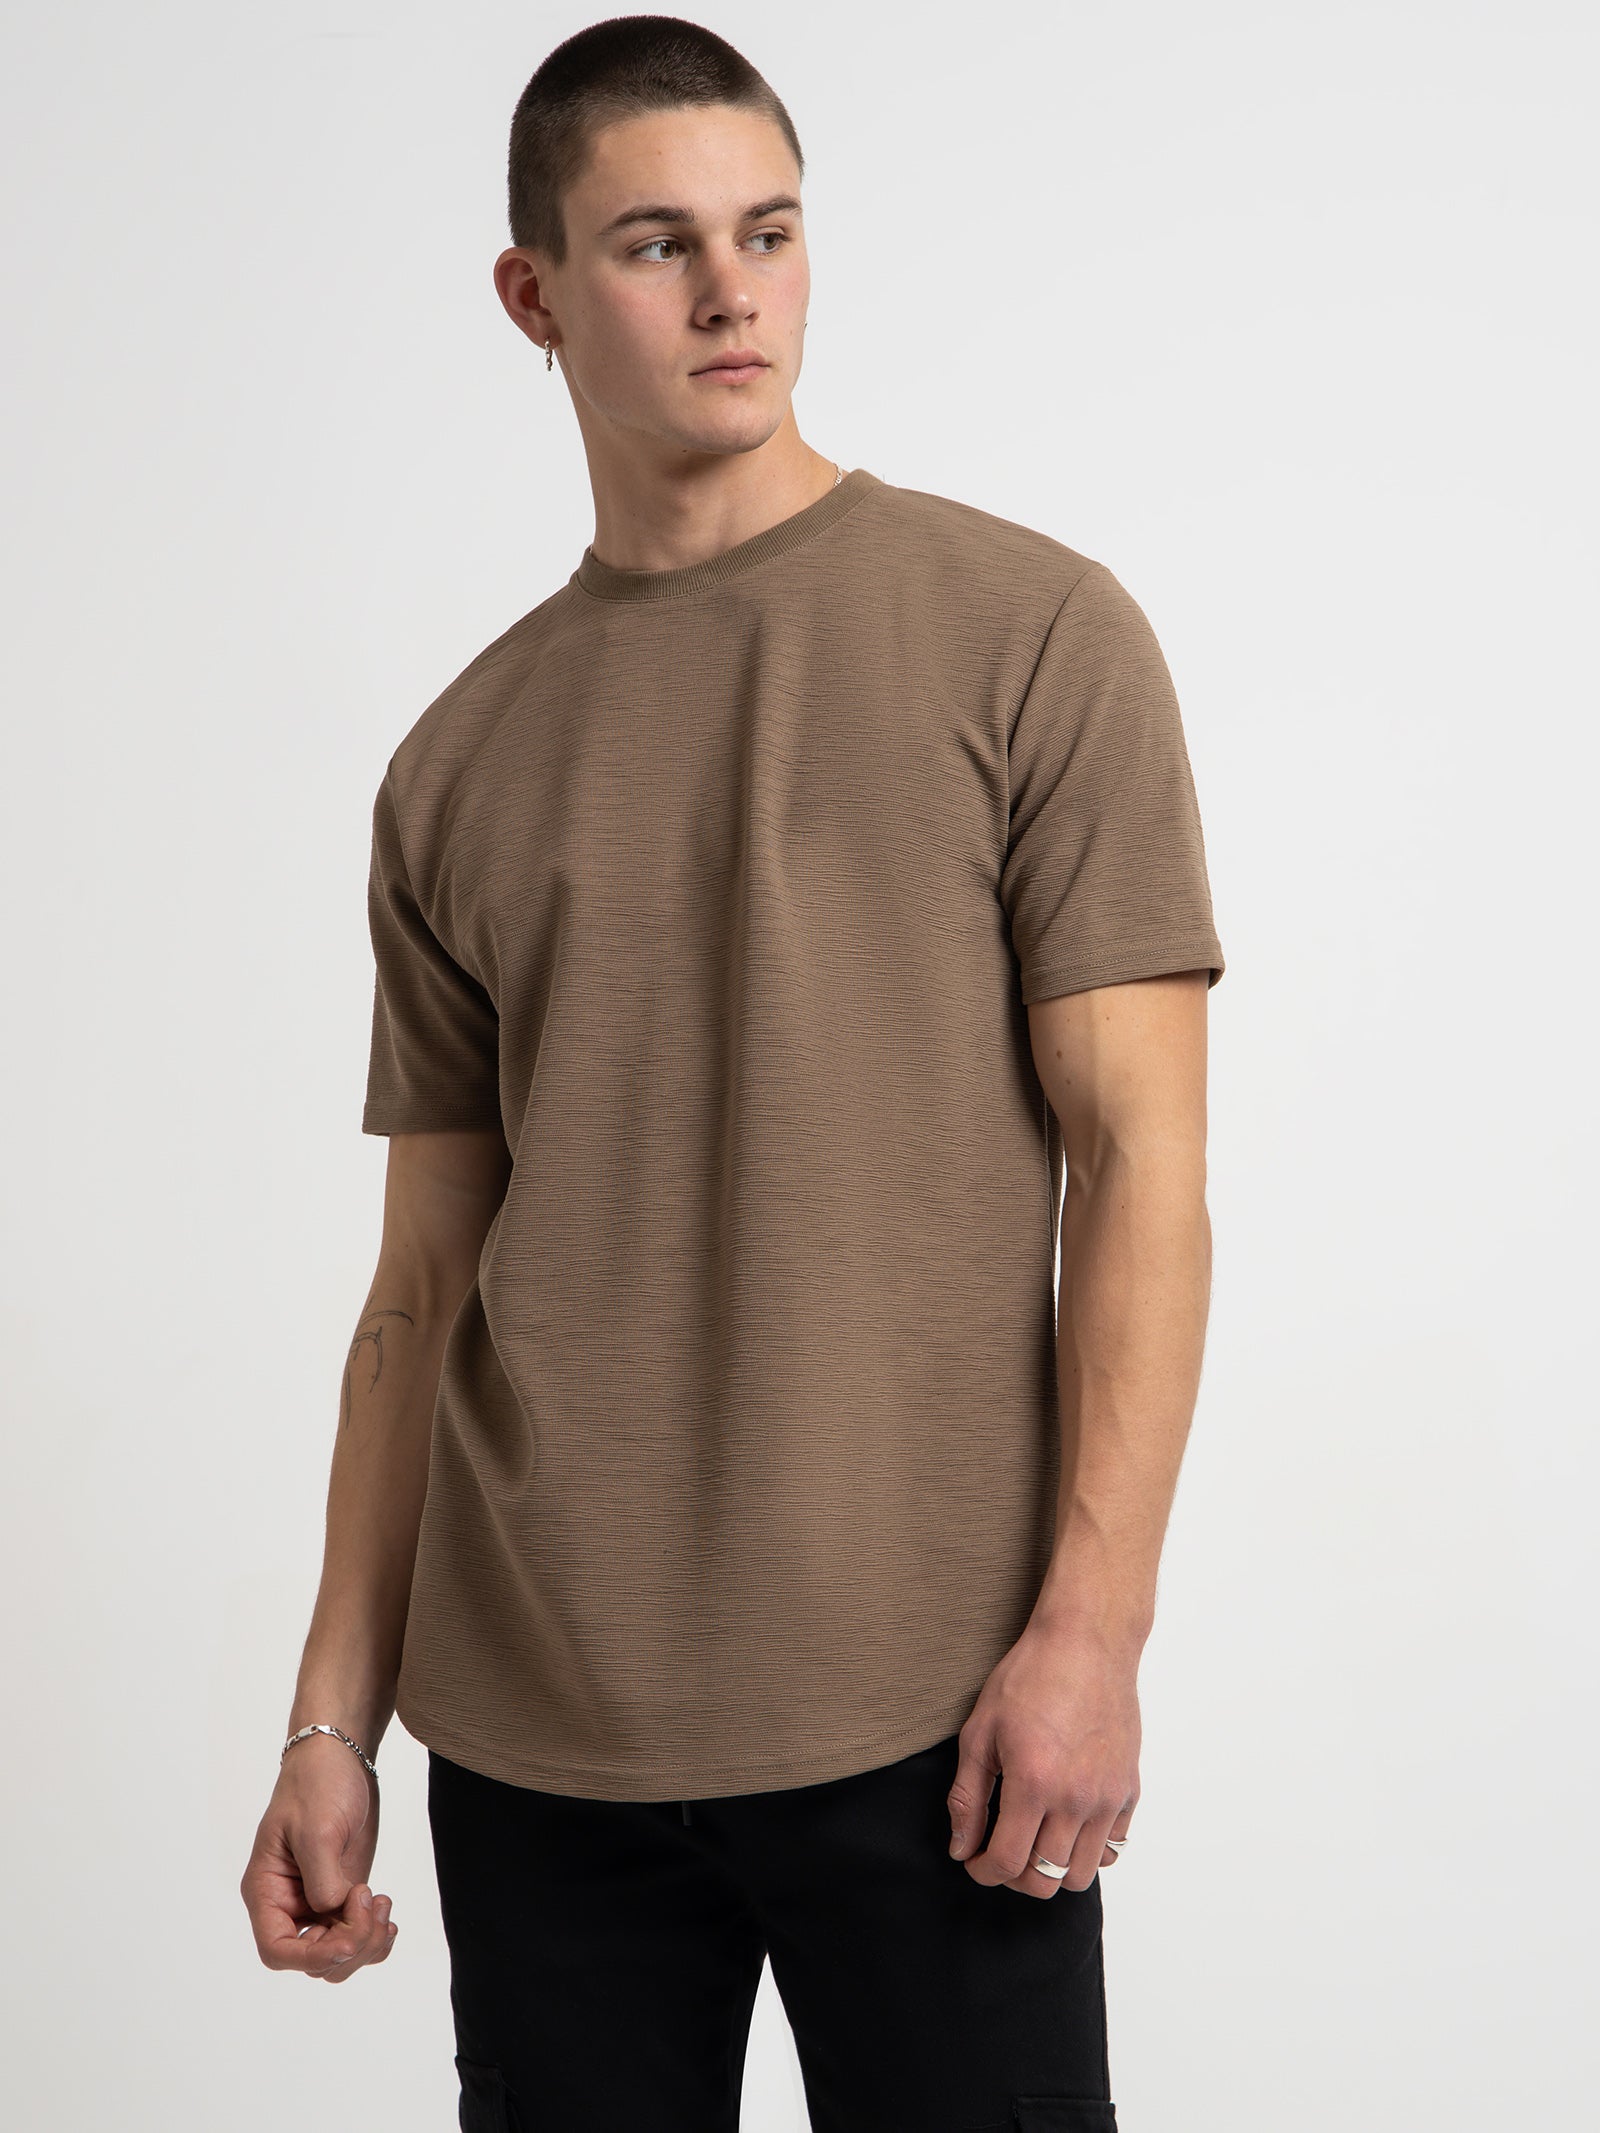 Lincoln T-Shirt in Tan